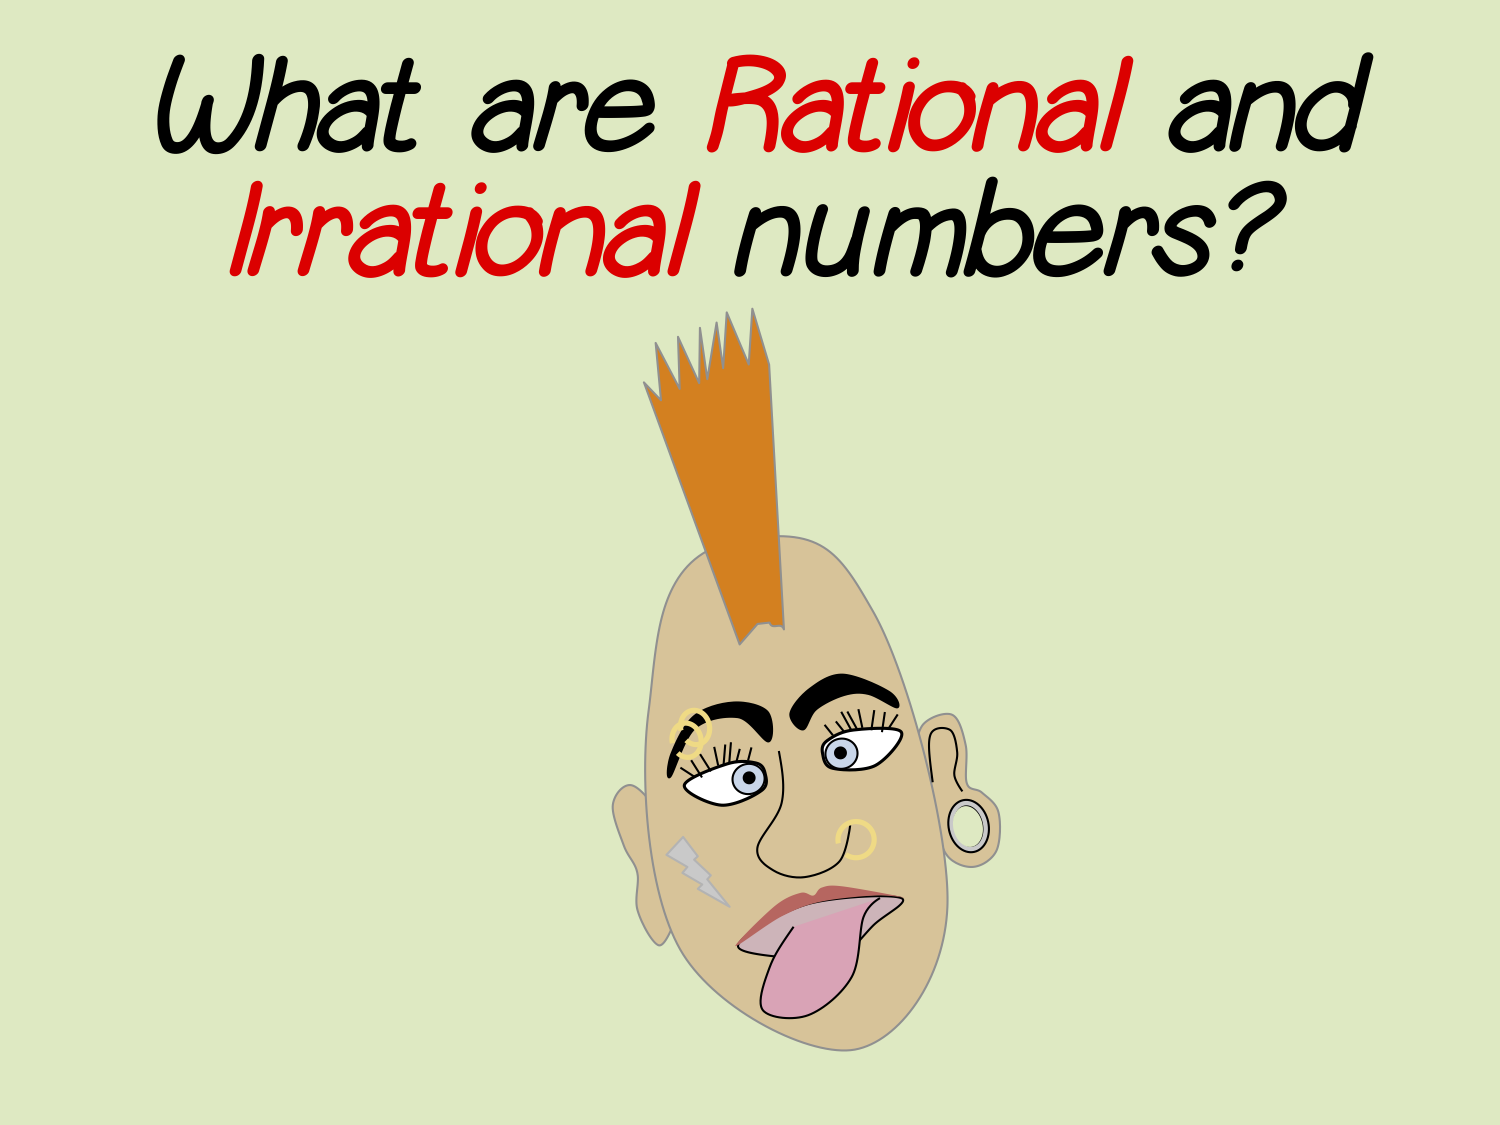 What are rational numbers?